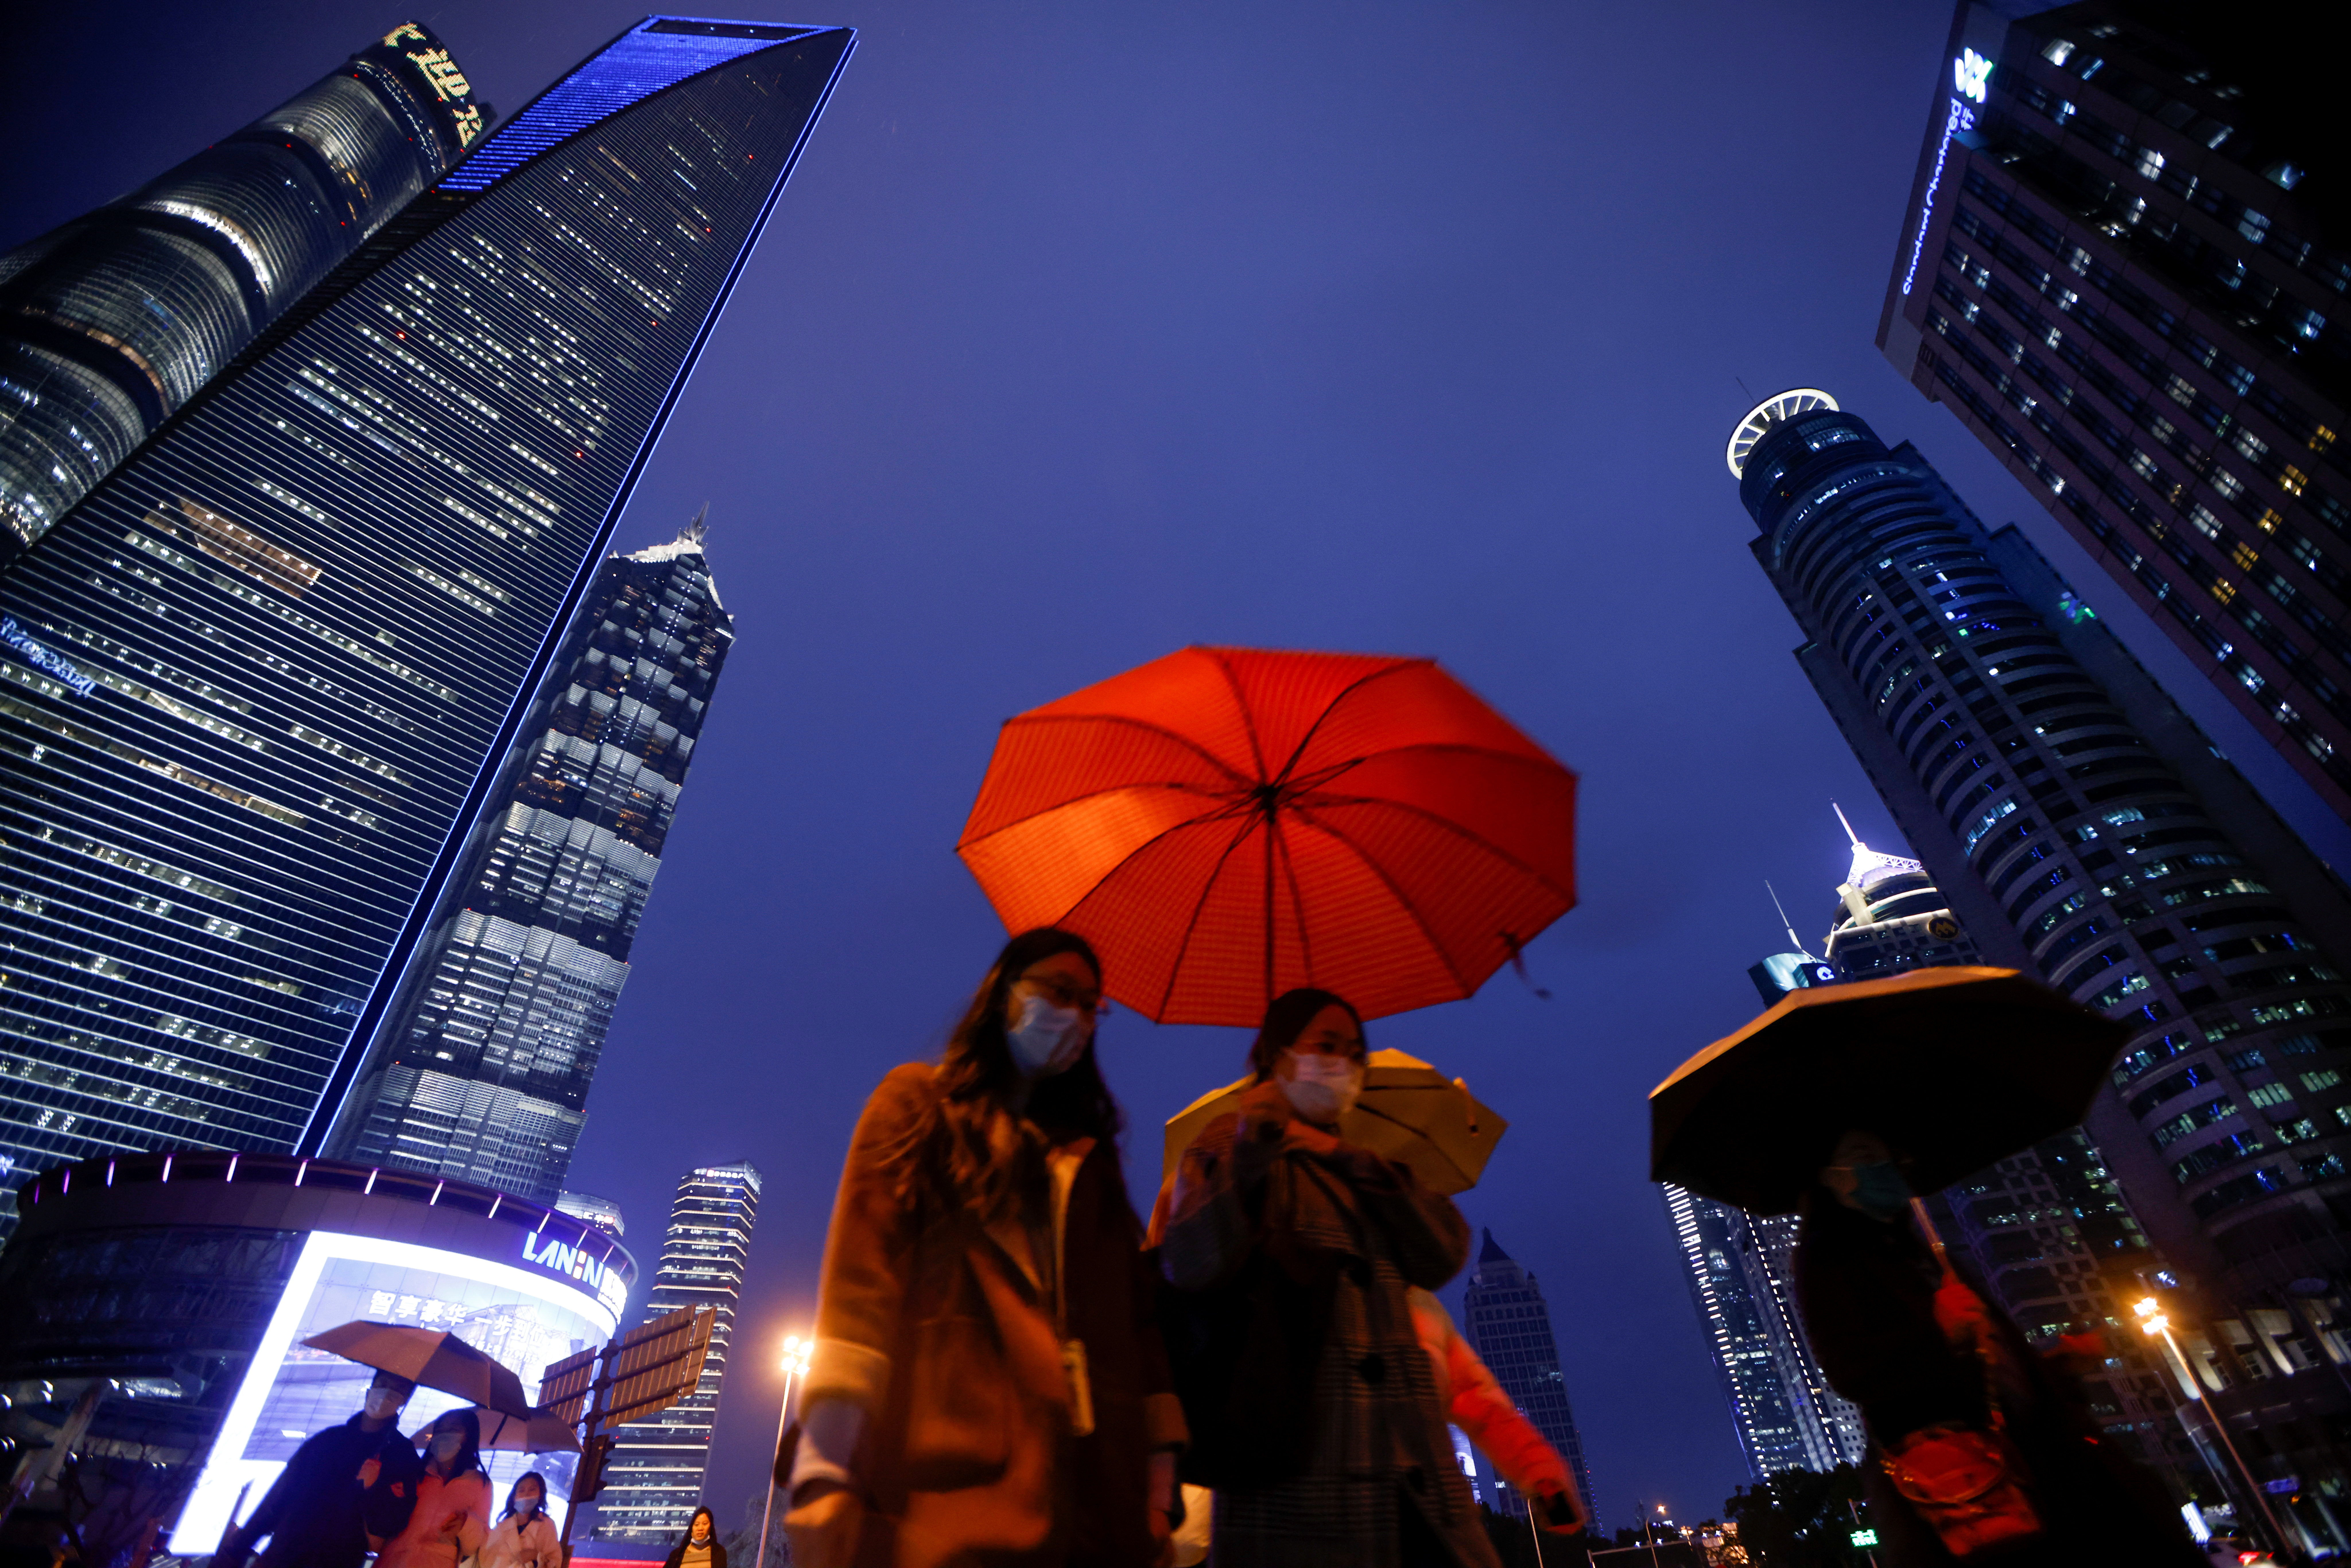 People walk with umbrellas in Lujiazui financial district in Pudong, Shanghai